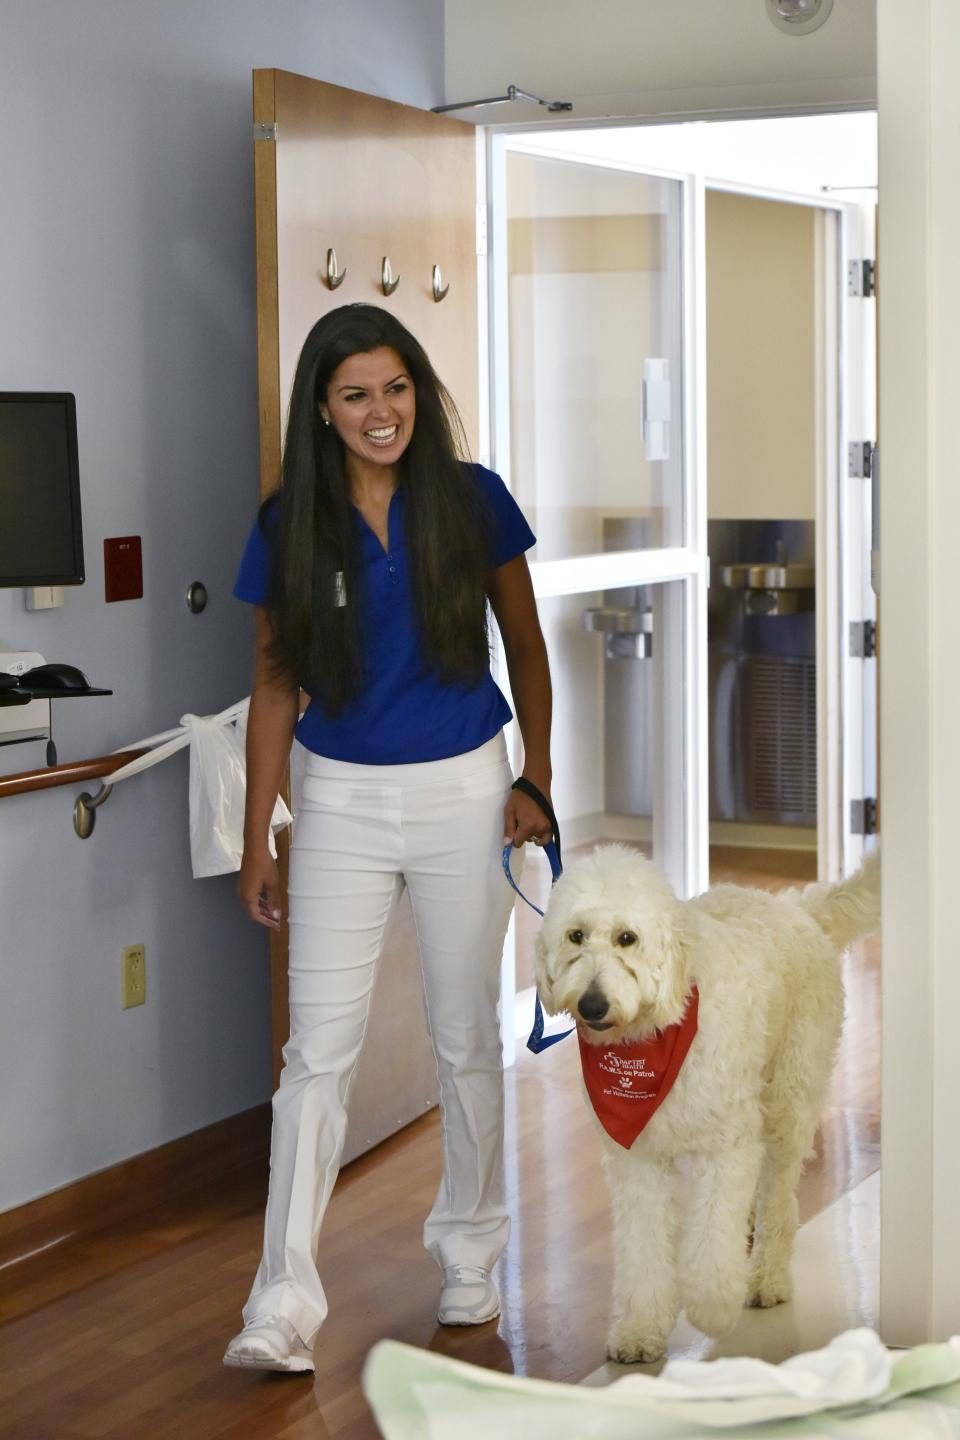 In this 2016 photo, Melissa Loeffelholz brings her dog Oscar, an English Goldendoodle, into a patient's room at Baptist Medical Center. Oscar was part of the hospital's Grace Anderson Pet Visitation Program designed to provide comfort to patients during their stay. Loeffelholz began participating as a way to give back she said, following a car crash that left her hospitalized for long periods.